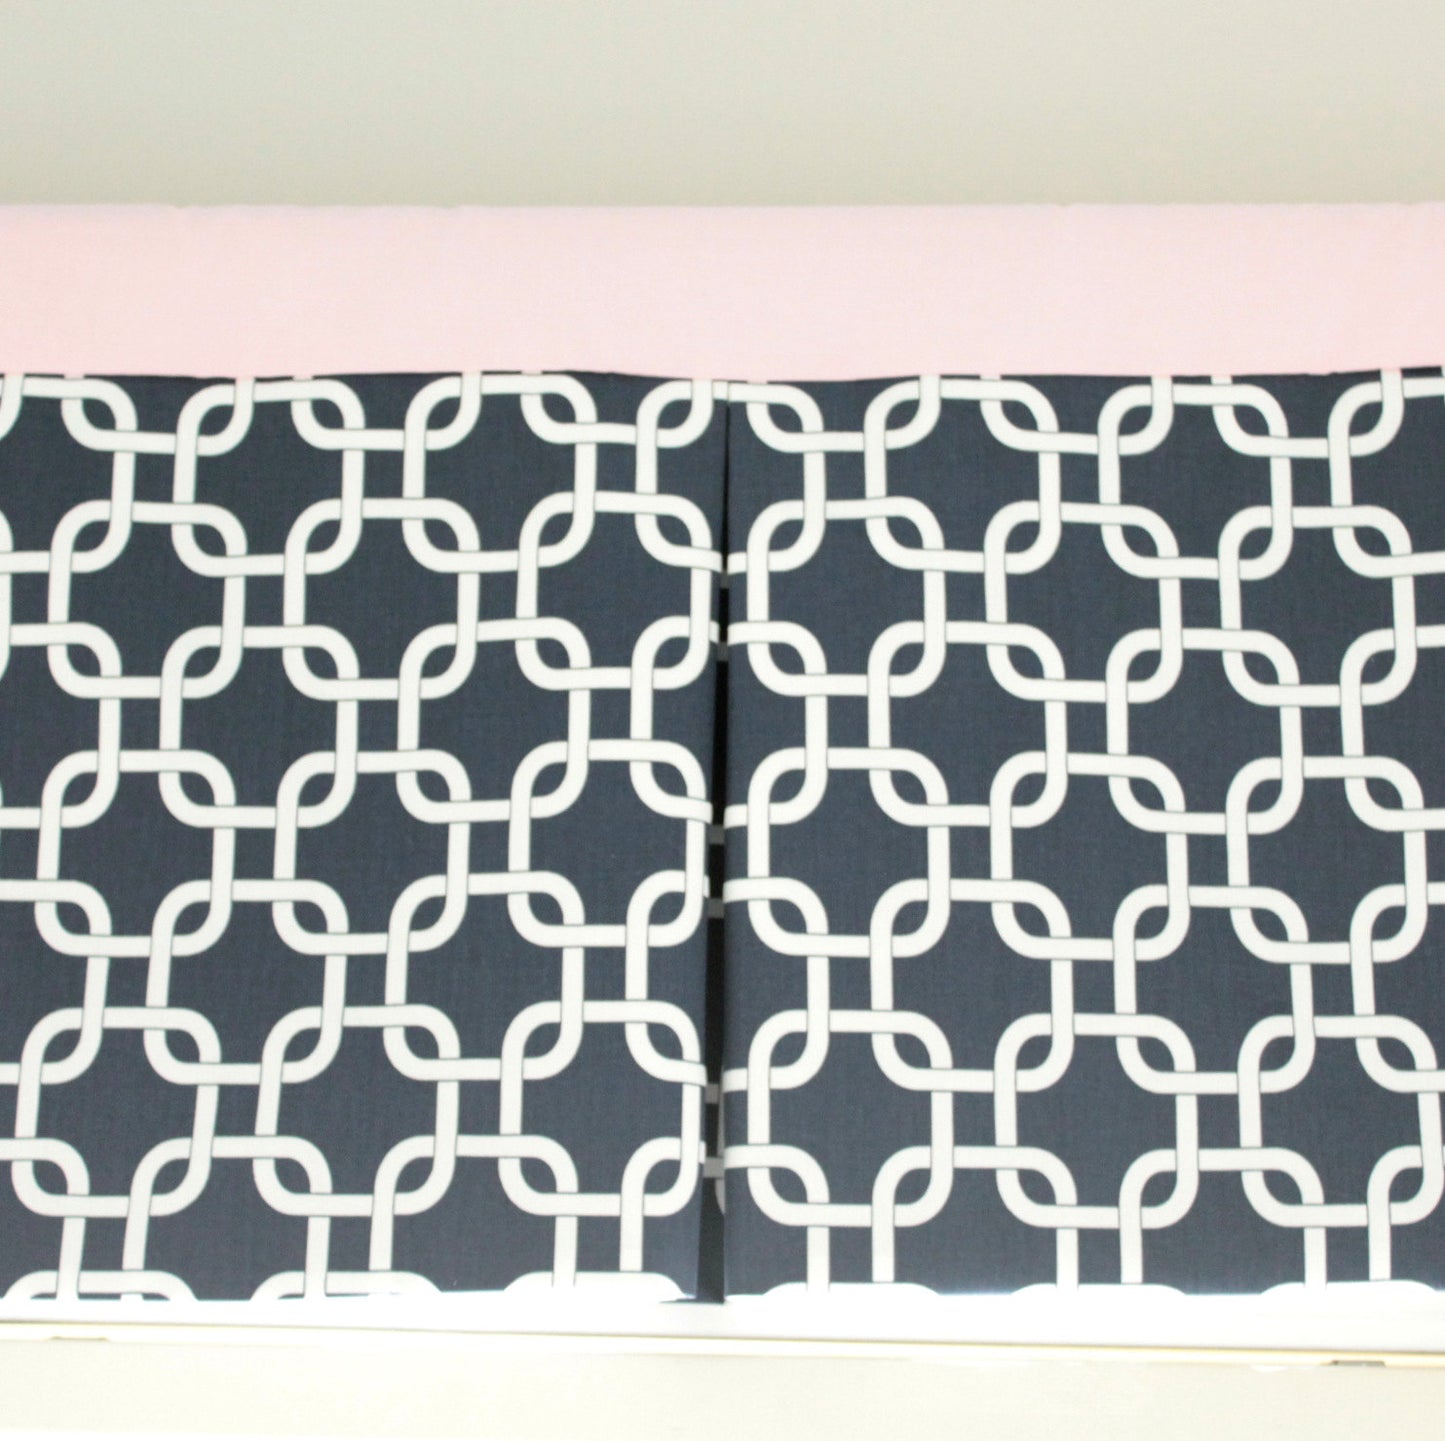 Navy Blue Gotcha and Pink Box Pleat valance. Available in other collections.